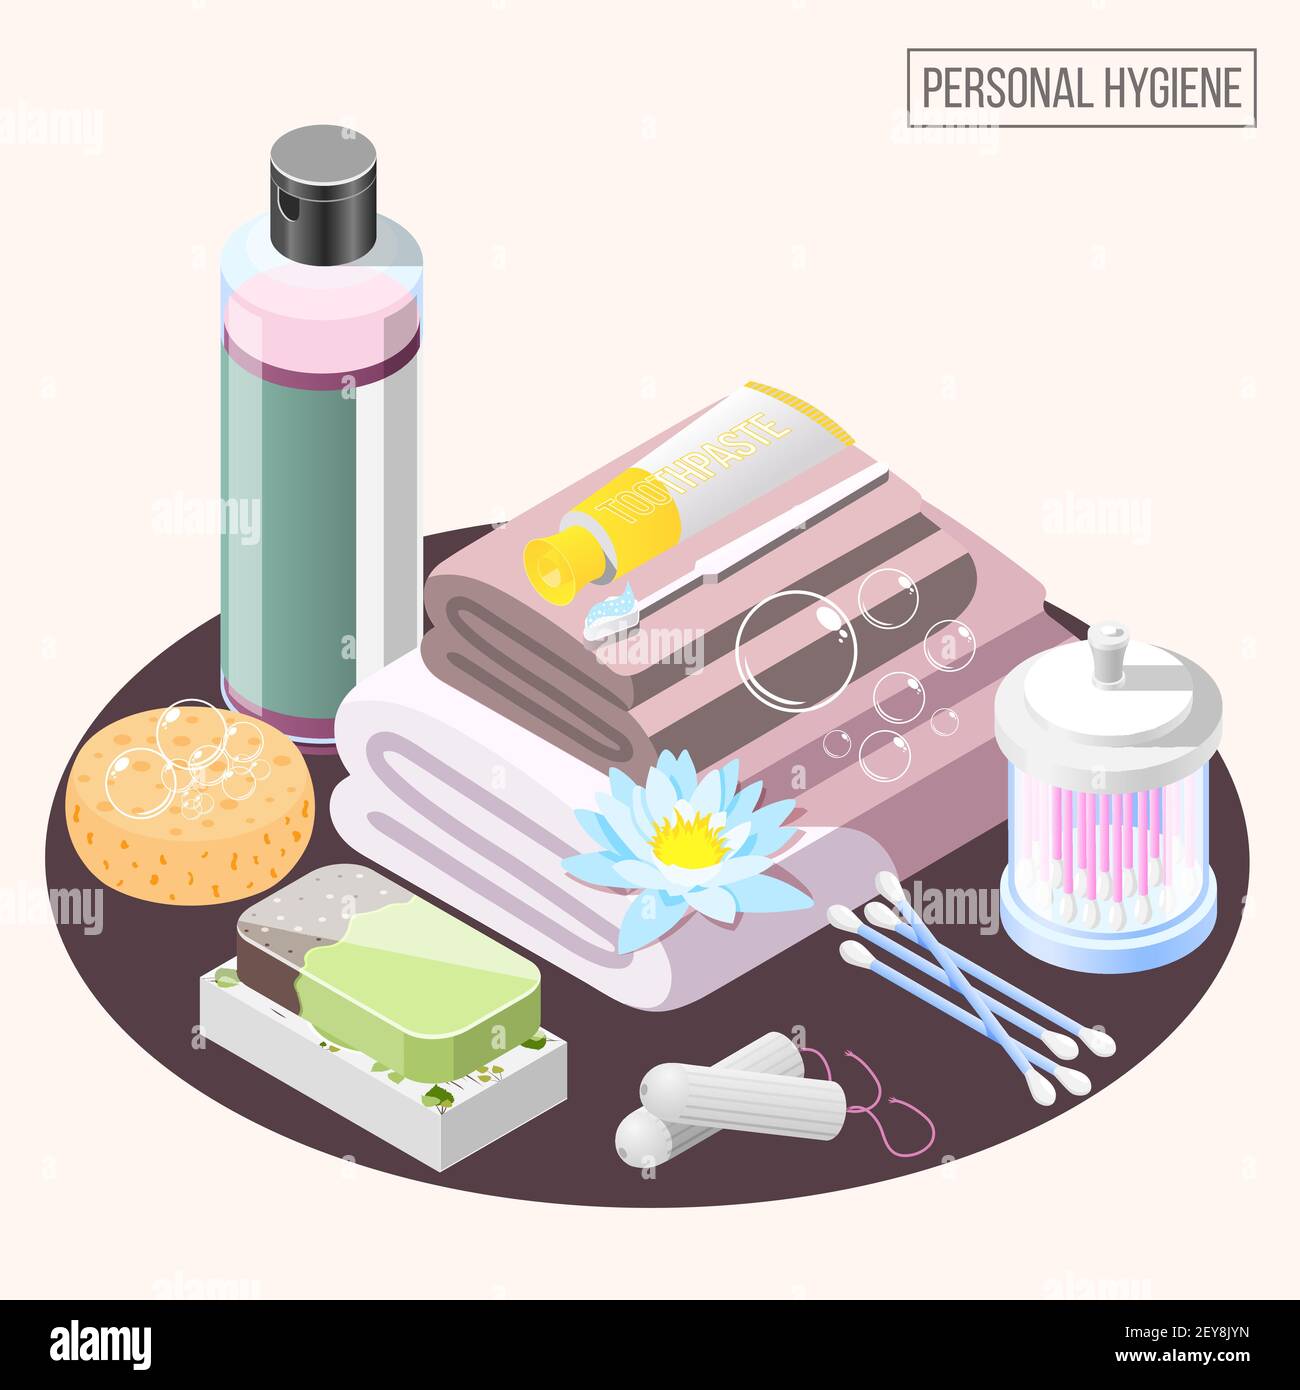 Personal hygiene isometric composition with shower gel soap stack of towels ear cleaning sticks vector illustration Stock Vector